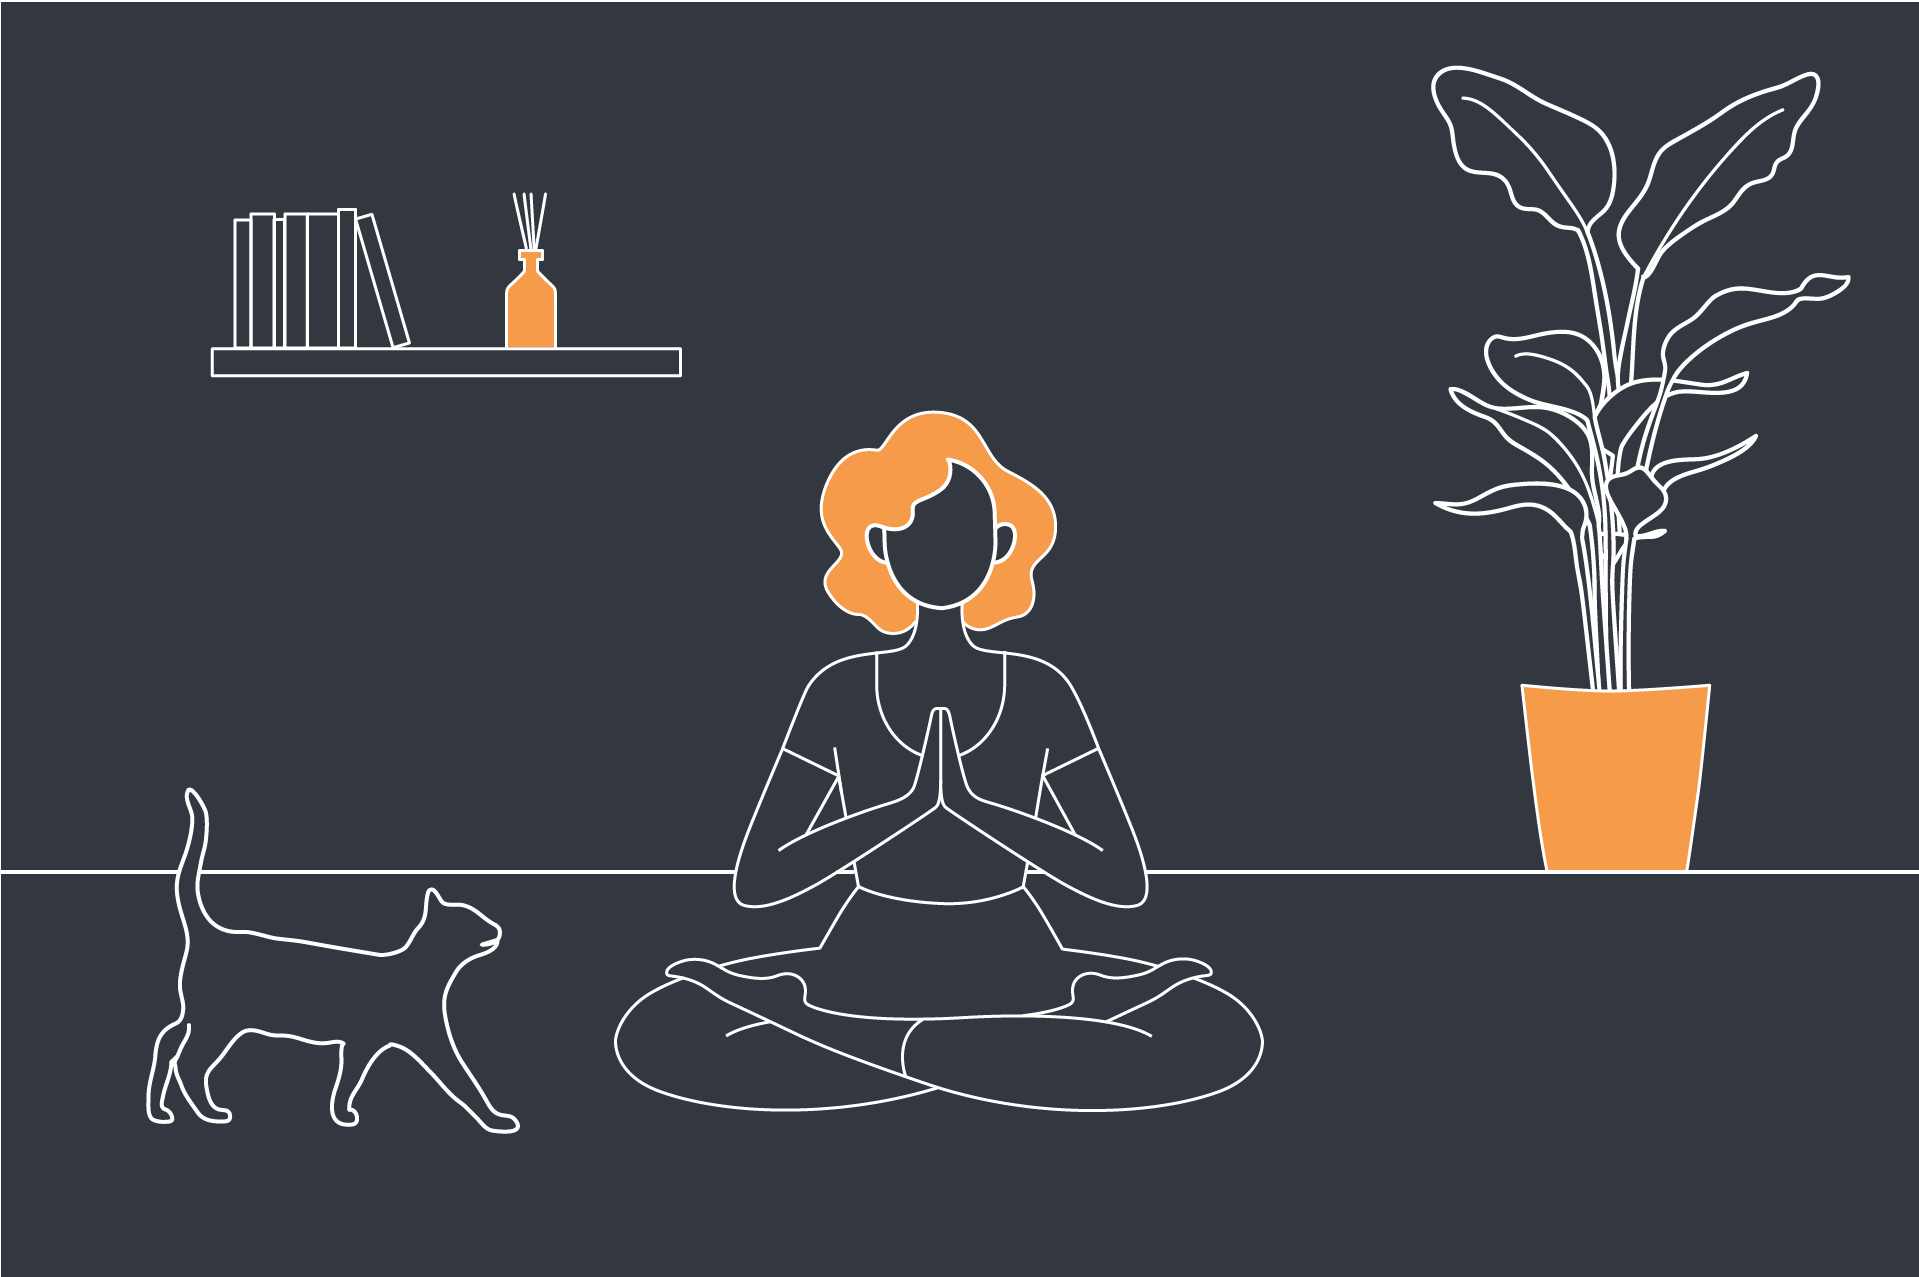 Illustration of a woman sat on the floor and meditating, in a calming home environment